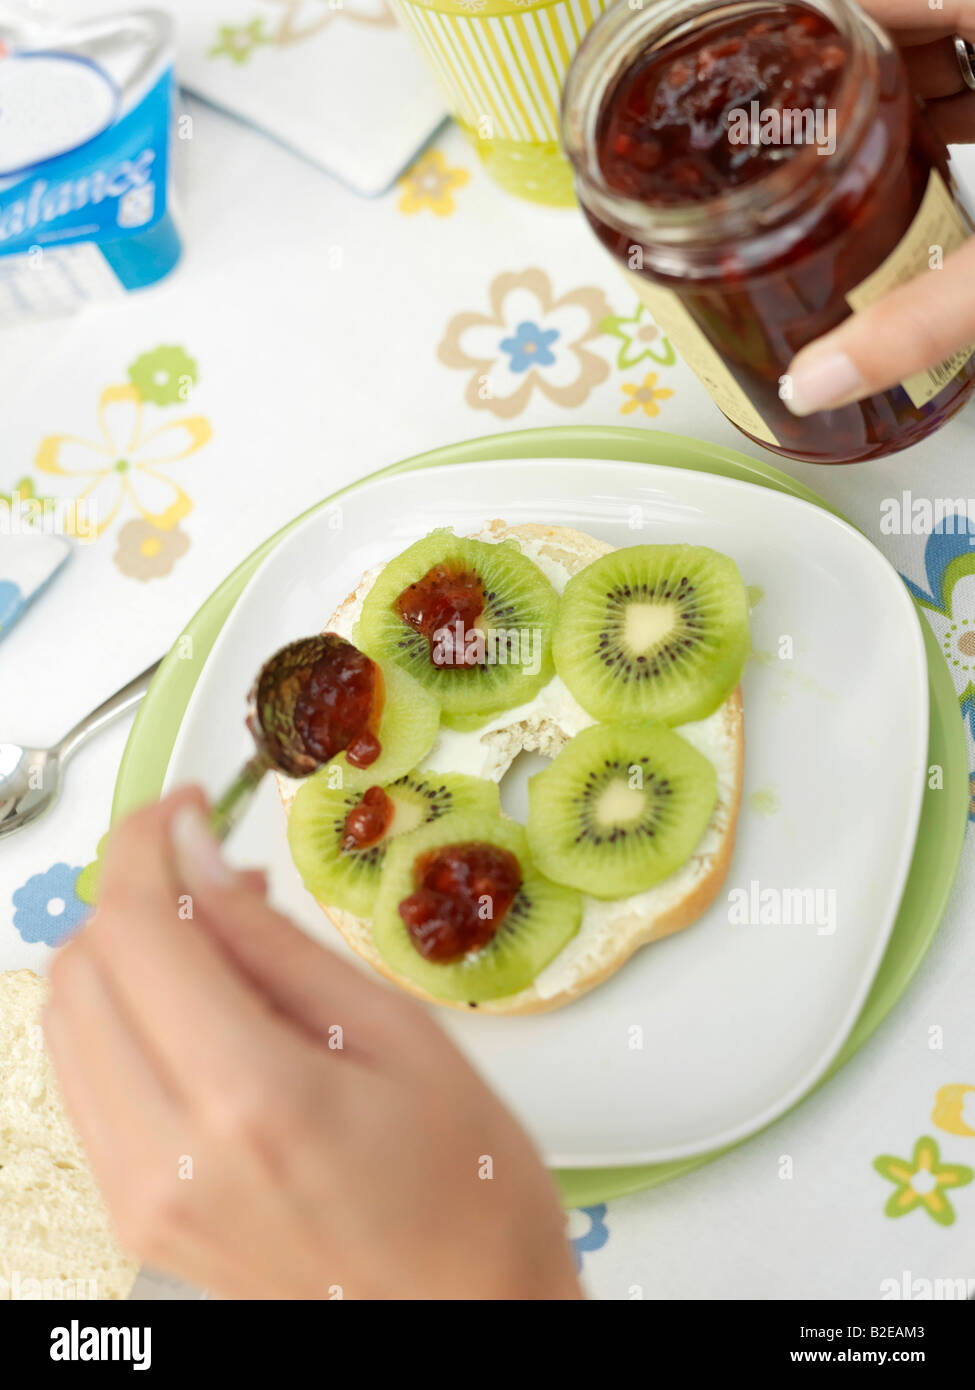 Close-up of person's hand putting jam on slices of kiwi fruit Stock Photo